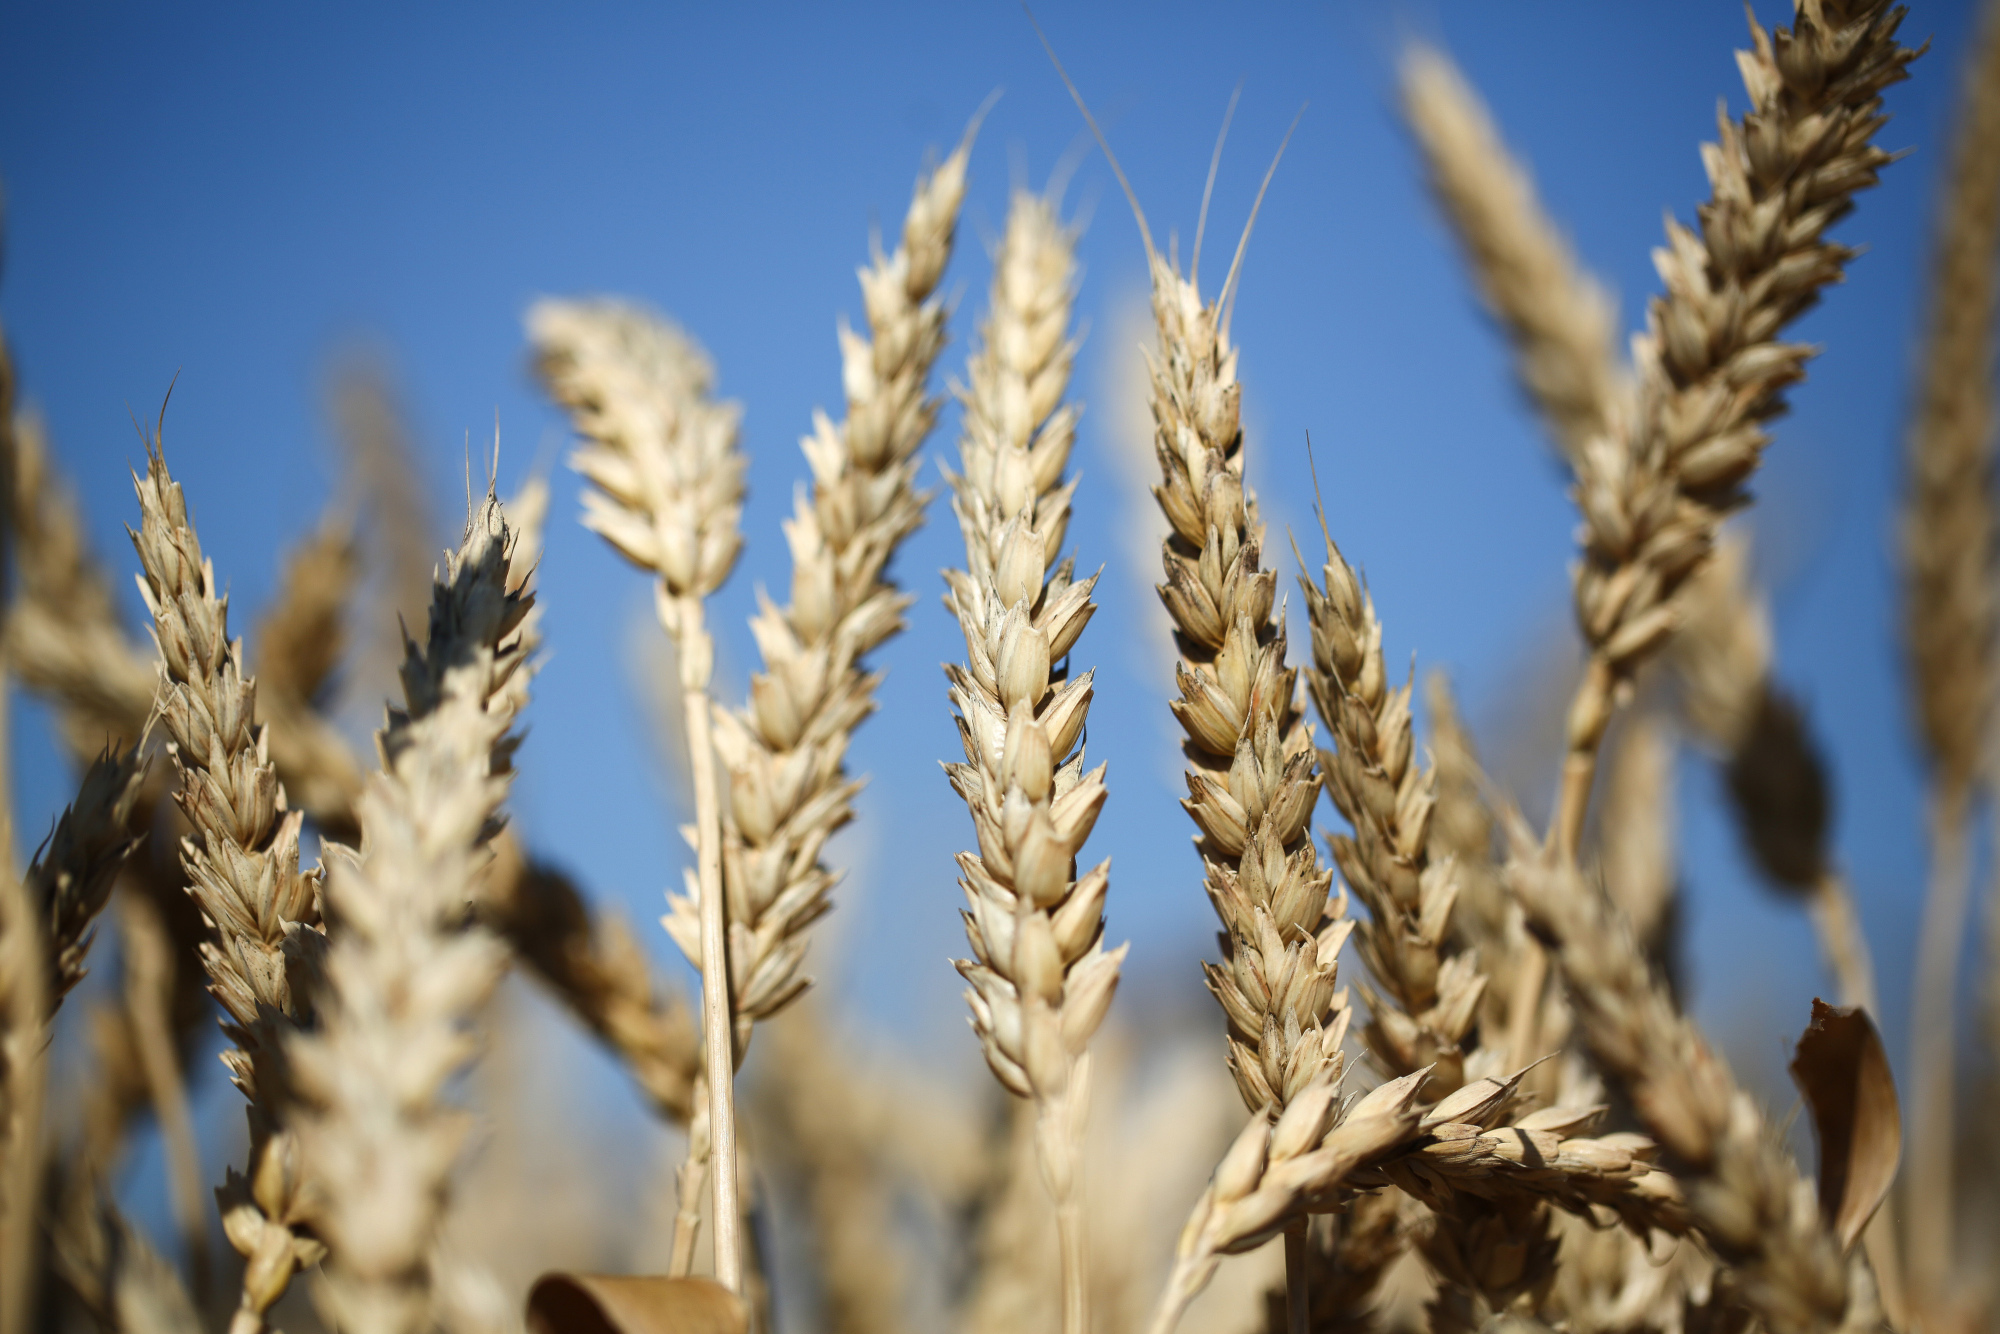 How Bad Was Winter for Wheat? In Kansas, We're About to See - Bloomberg